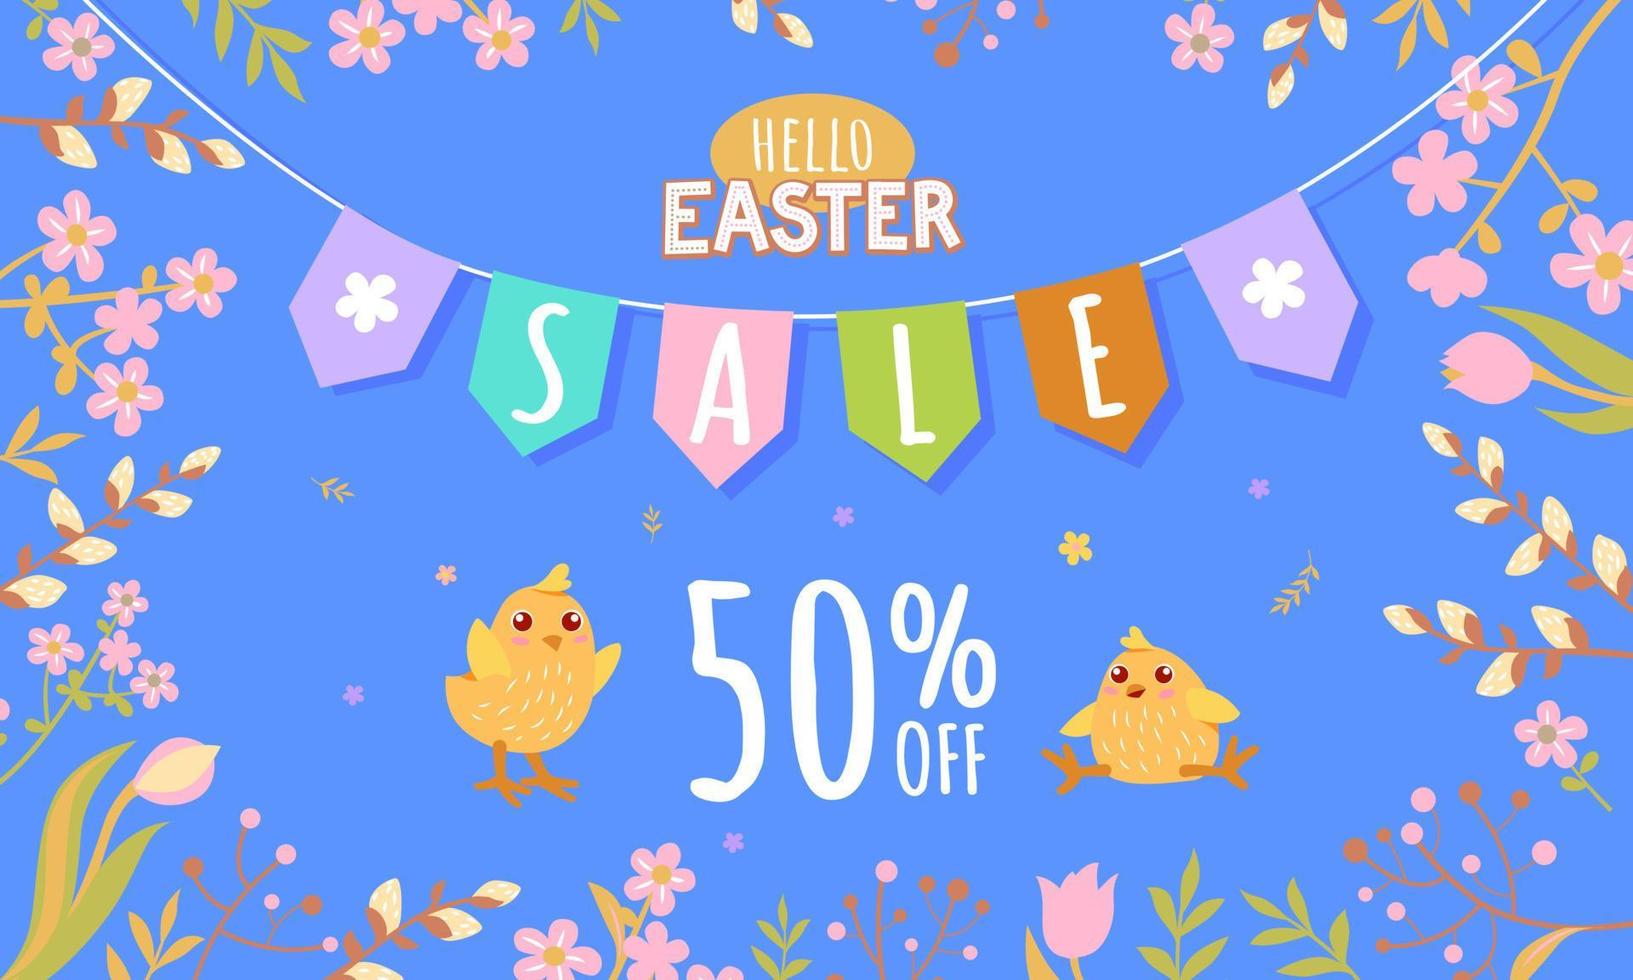 Banner with Easter chickens on a blue background - 50 off. Poster, postcard Hello Easter. vector